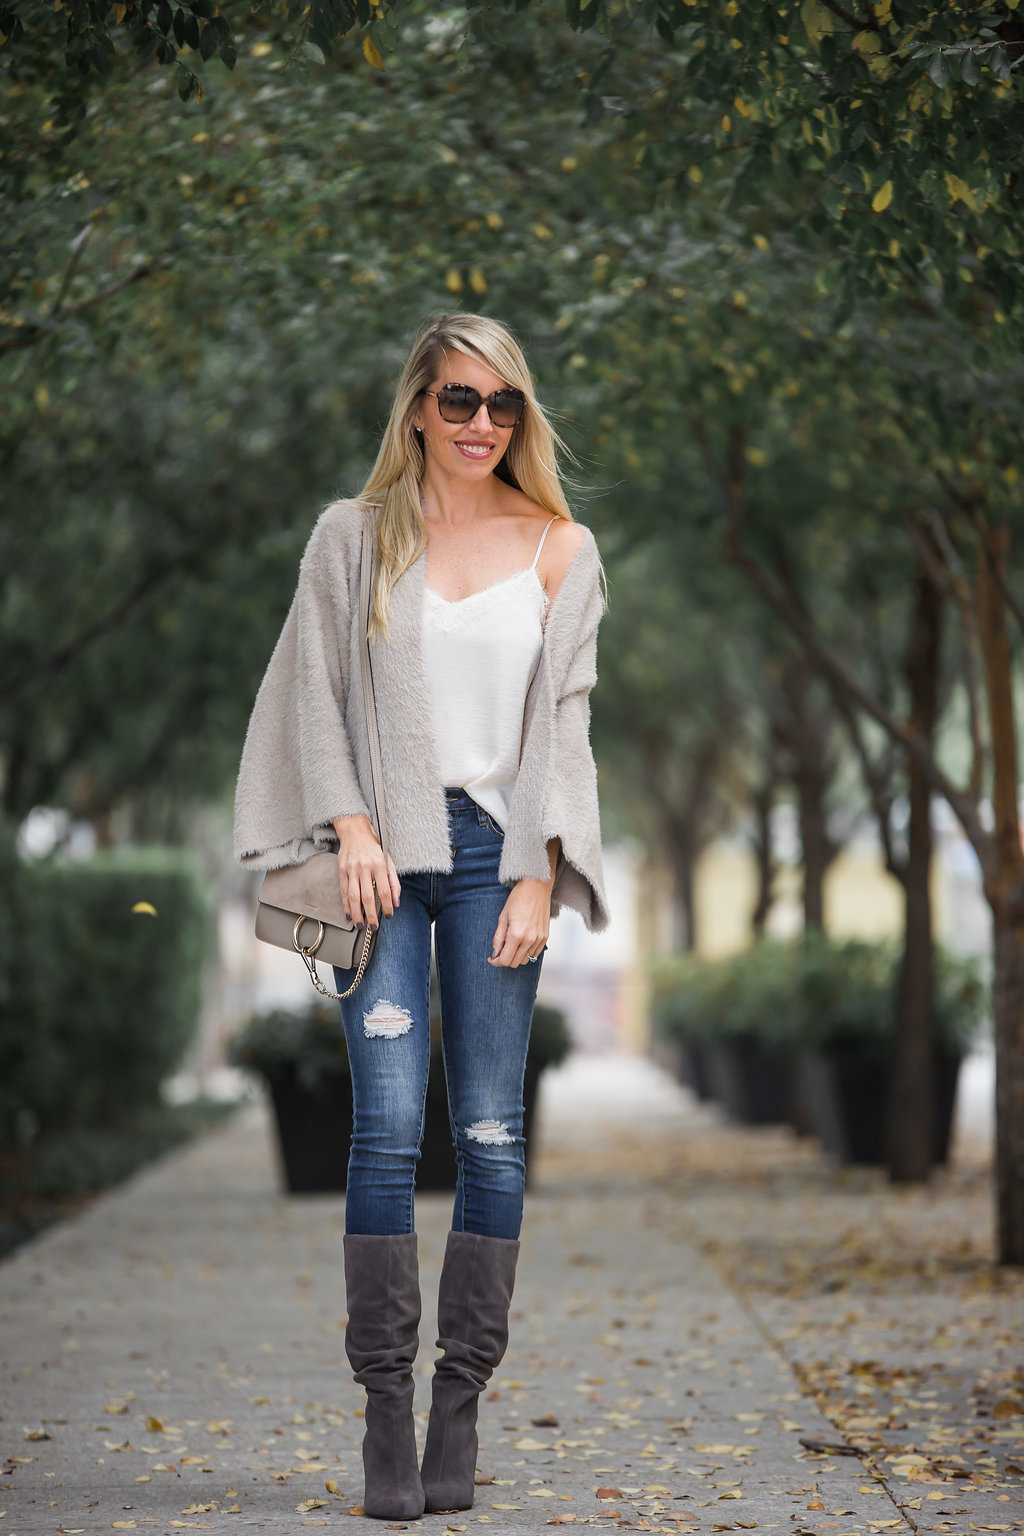 cozy neutral cardigan worn with grey suede boot and a lace cami